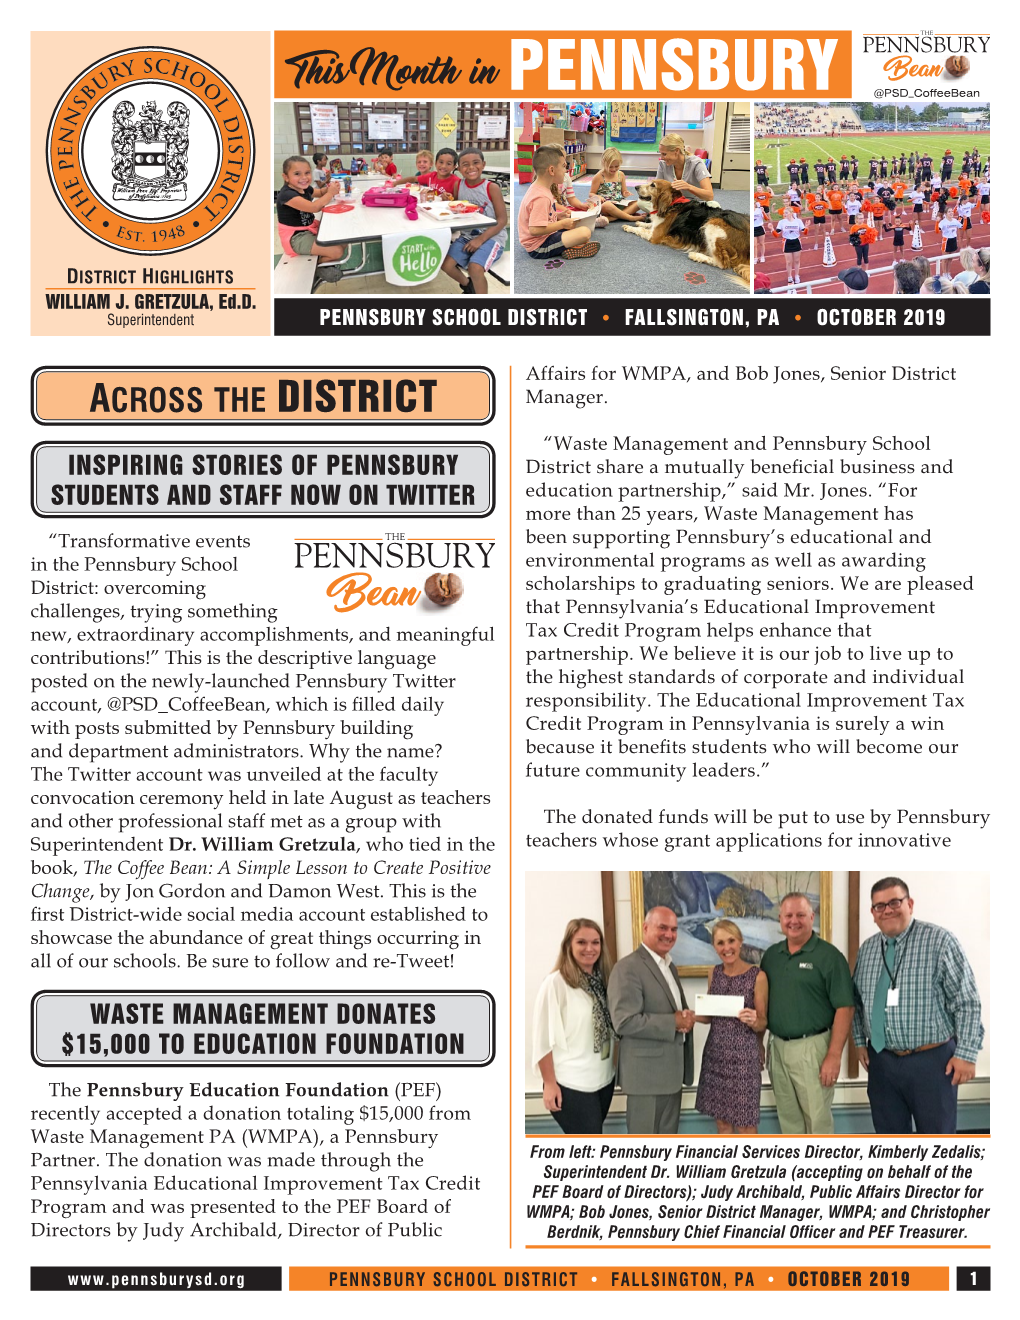 District Highlights Report School, Classroom, and Curricular Enhancements As a Pennsbury Principal, Are Approved by the PEF Board on a Semi-Annual Mr